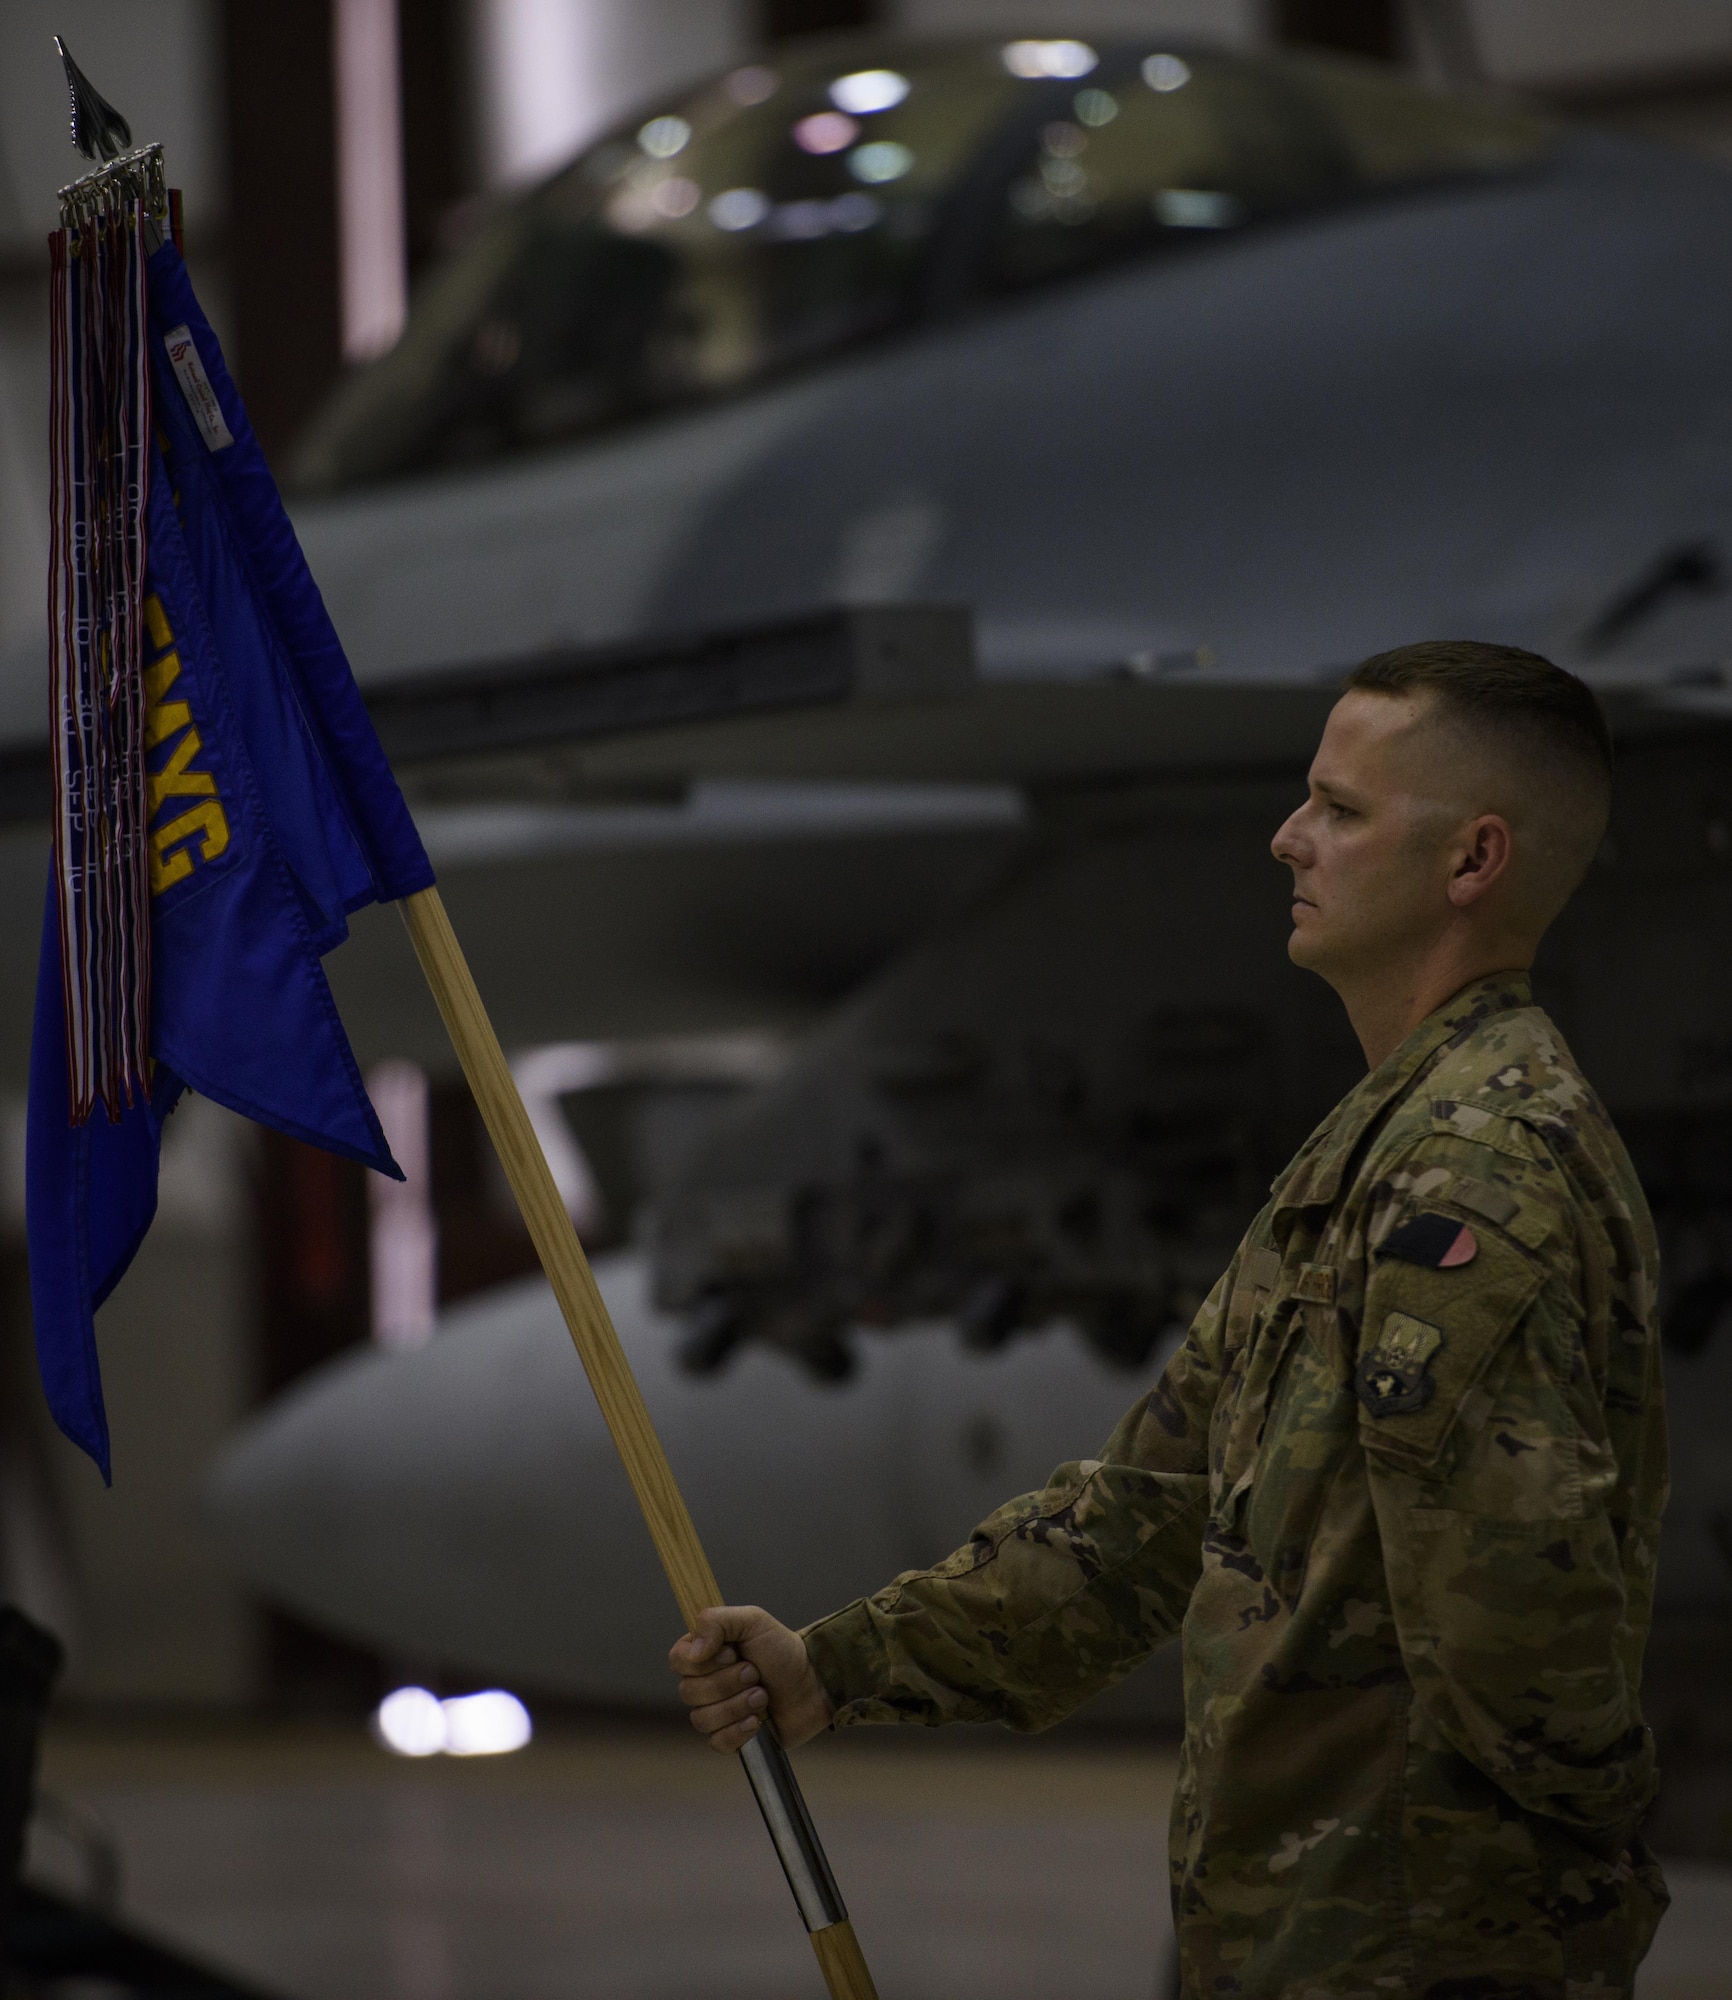 Senior Master Sgt. Michael Martin, the 455th Expeditionary Maintenance Squadron first sergeant, stands at parade rest during a change of command ceremony at Bagram Airfield, Afghanistan, May 30, 2017. Martin, who is the 2nd Munitions Squadron first sergeant at Barksdale Air Force Base, La., deployed to Bagram with four other first sergeants from Barksdale. (U.S. Air Force photo by Staff Sgt. Benjamin Gonsier)